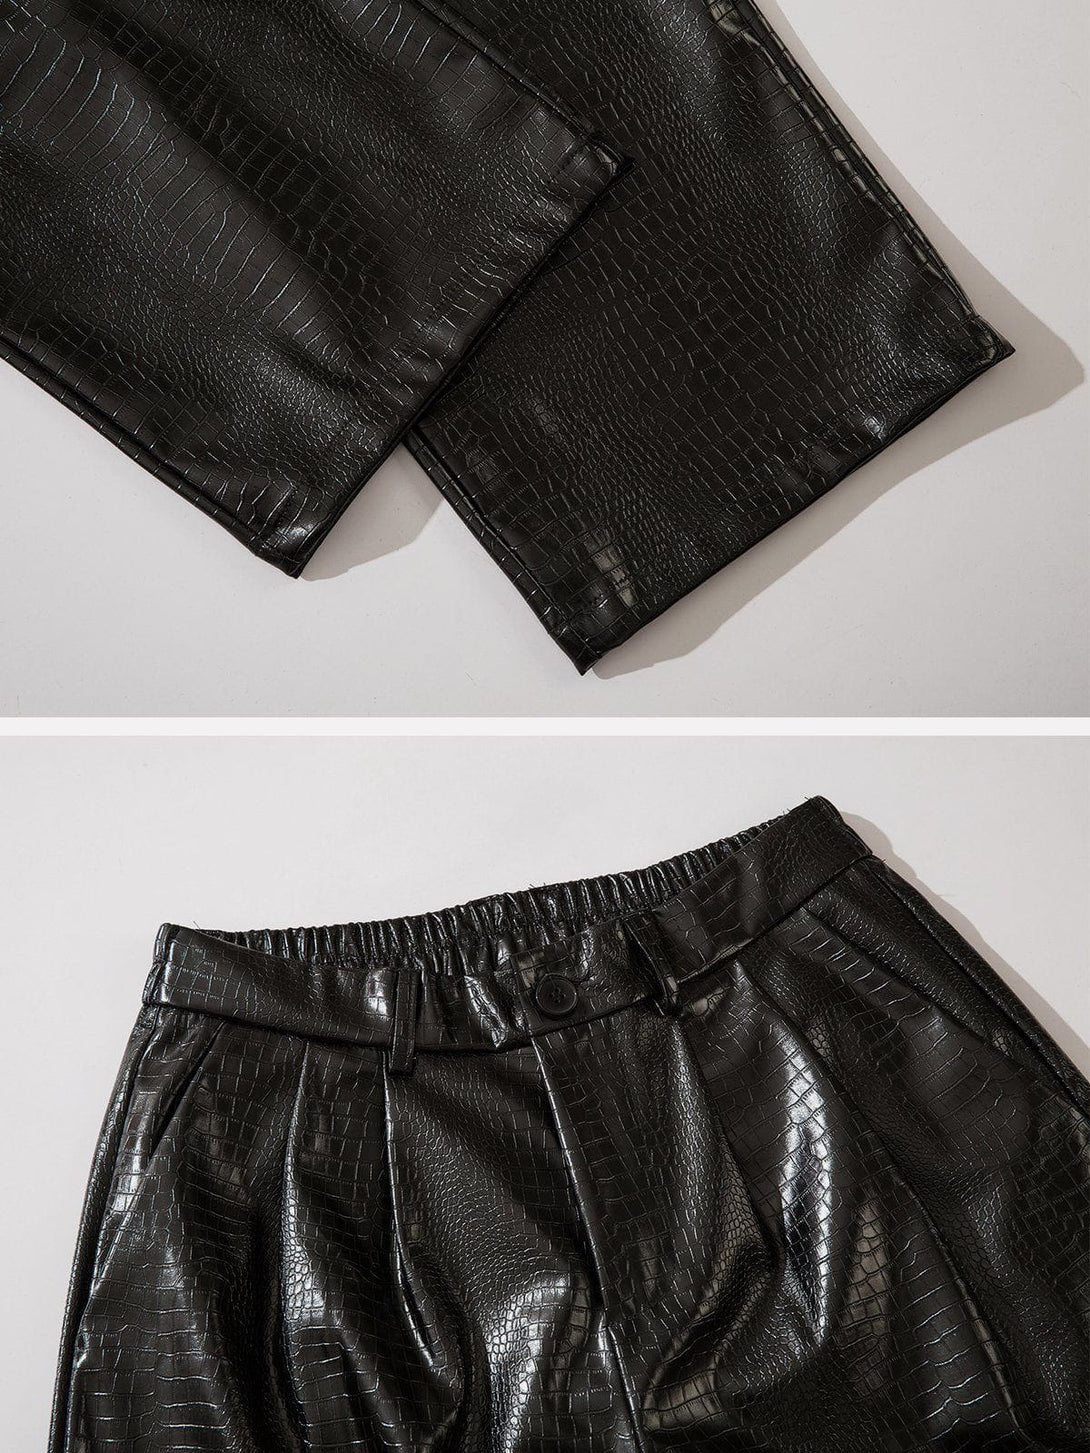 Levefly - Straight Leather Pants - Streetwear Fashion - levefly.com